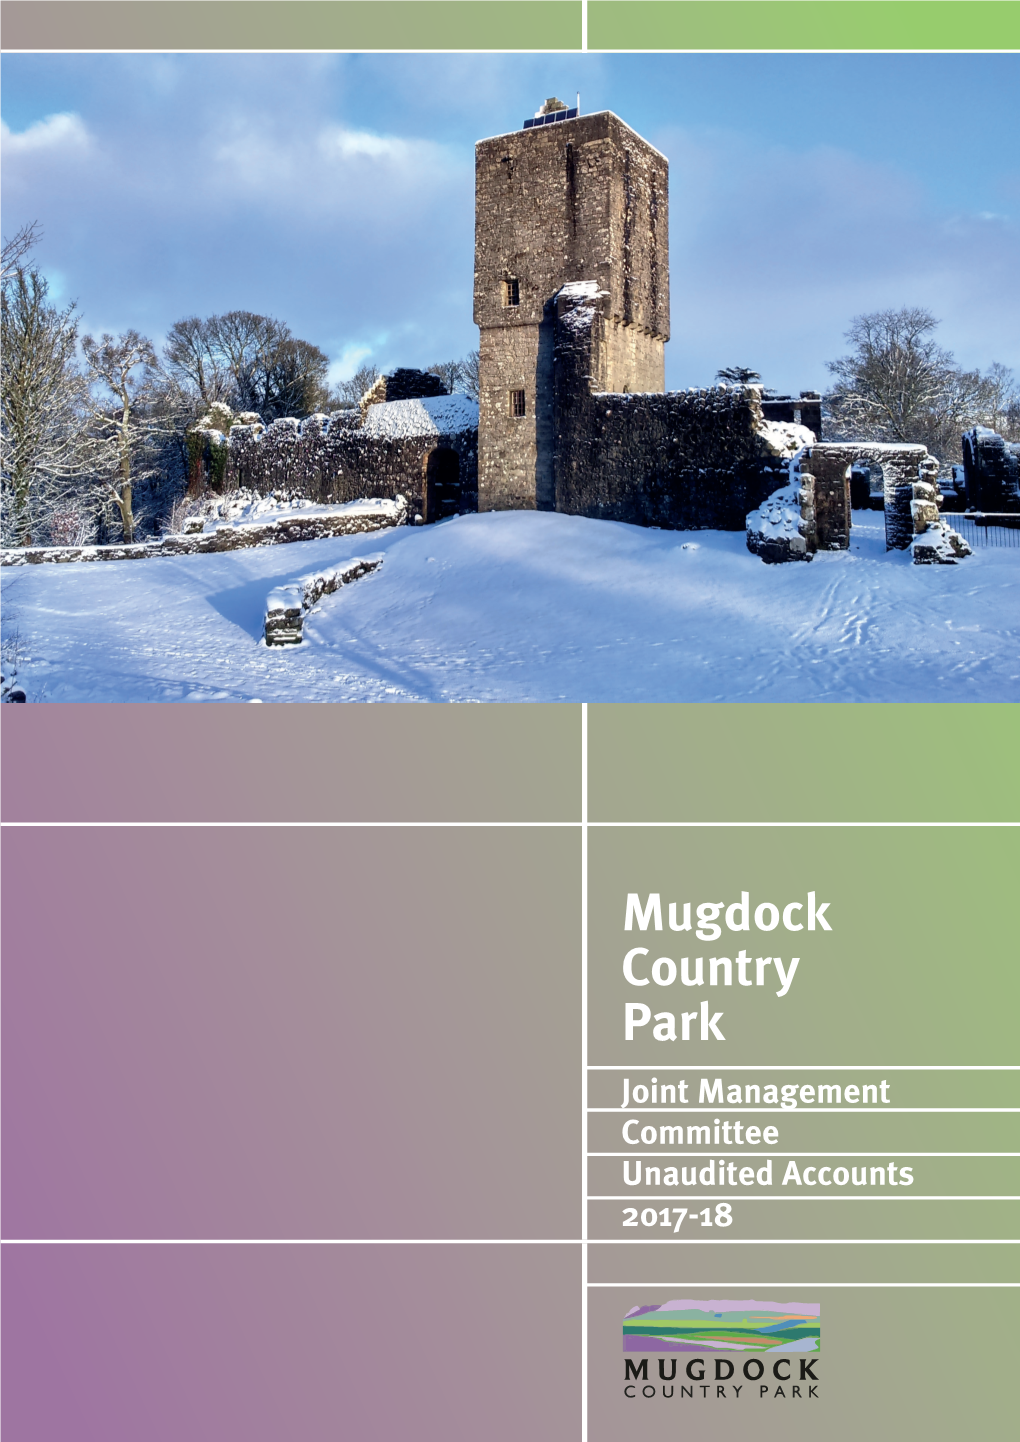 Mugdock Country Park Joint Management Committee Unaudited Accounts 2017-18 Mugdock Country Park Joint Management Committee